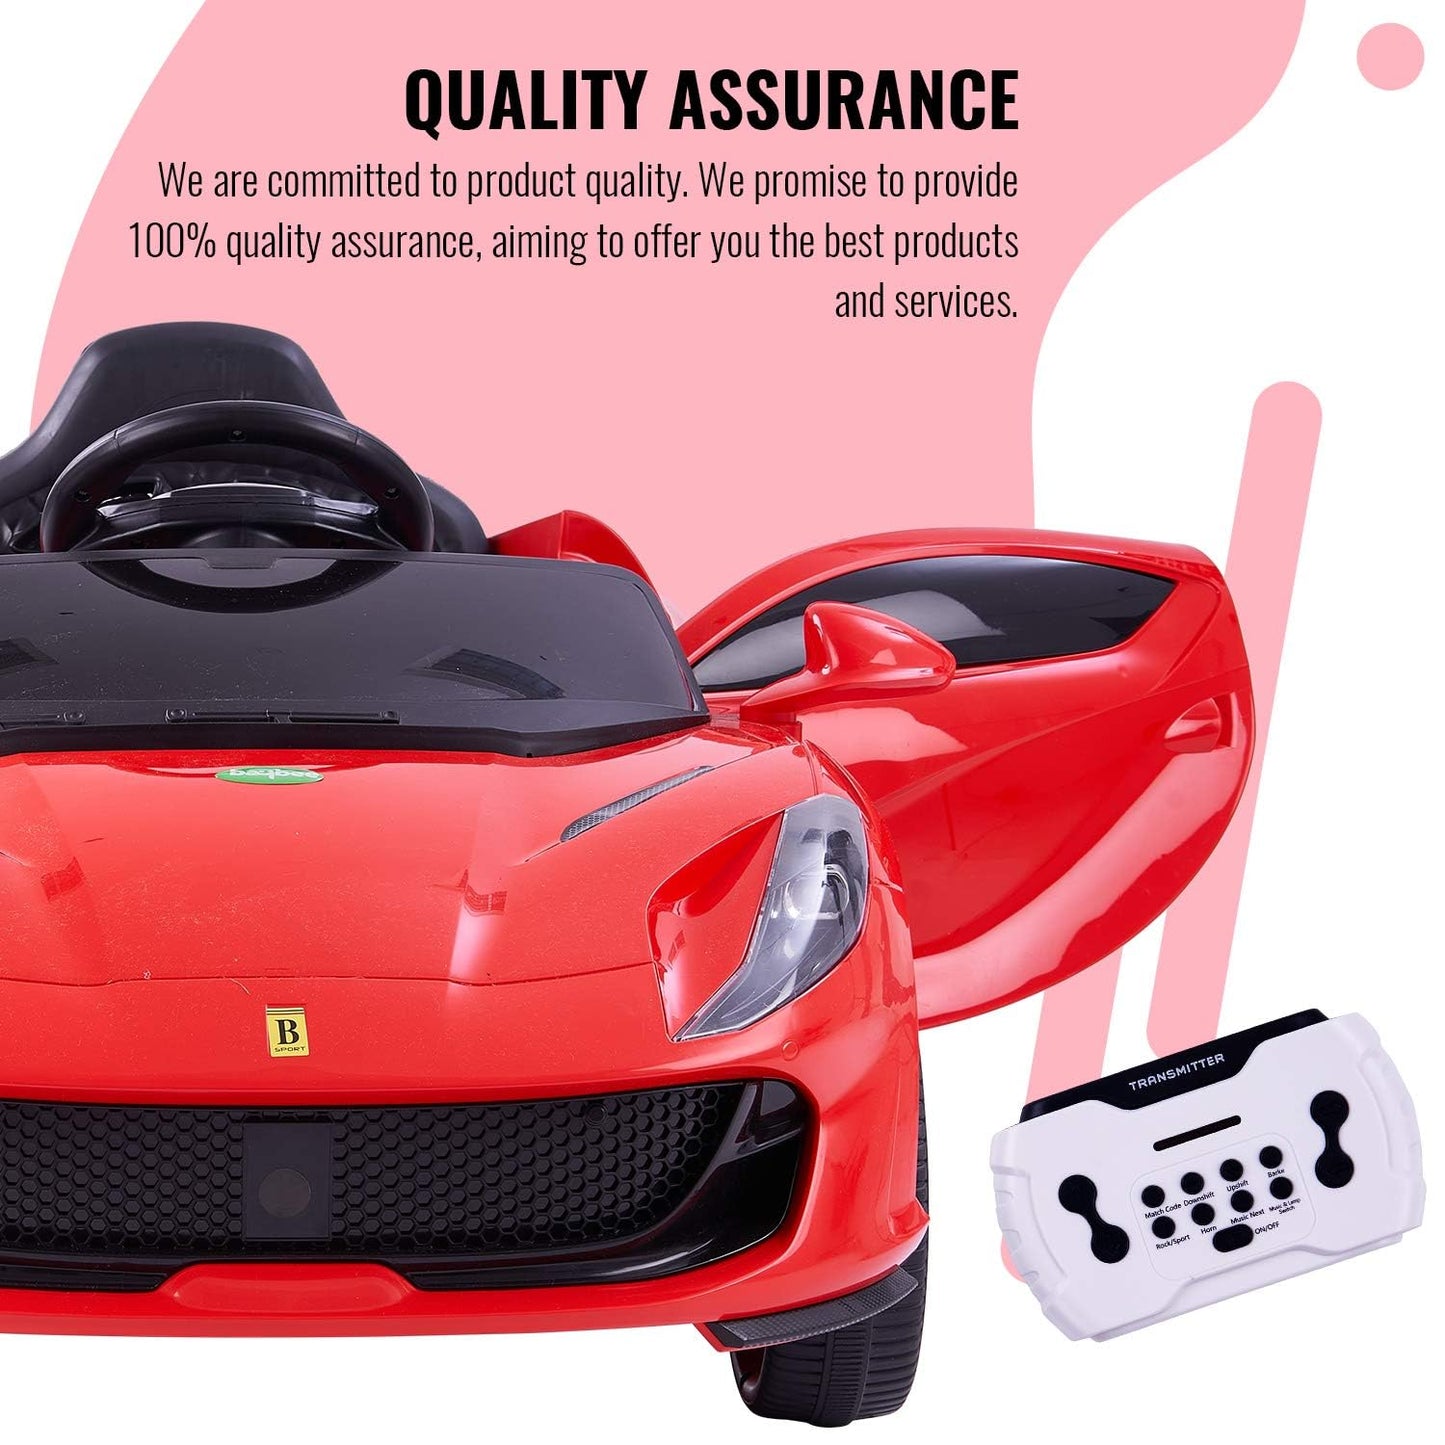 Tip Top Italia Baby Car Rechargeable Kids Car Battery Operated Motor Ride-On Car for Kids with 2 Electric Motor & 6V Battery Car for Kids Toy Car with Boys & Girls Age 2-6 Years Old (Red)